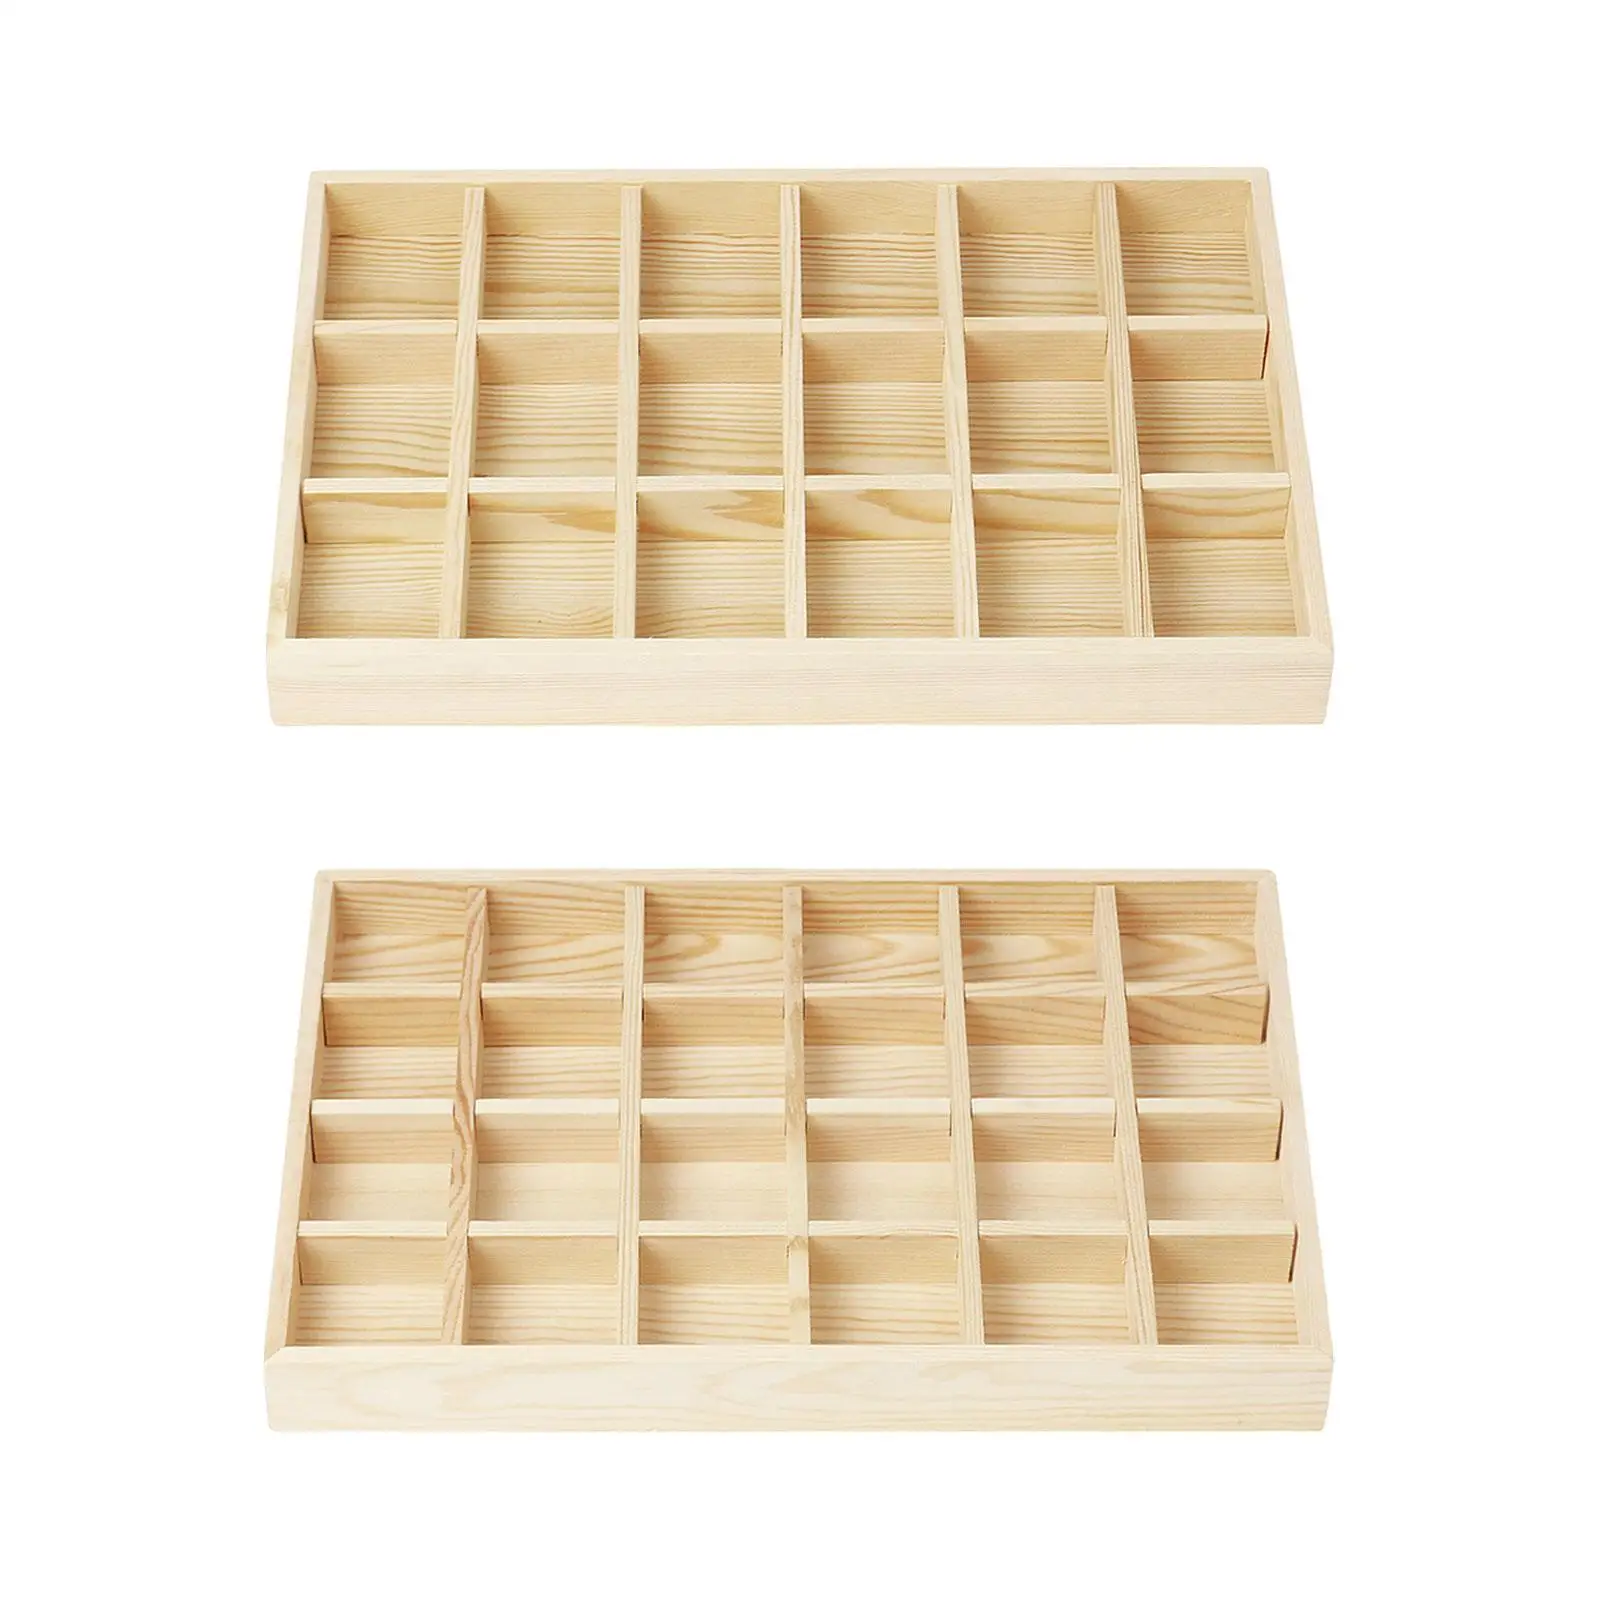 

Jewelry Display Tray Wood Hairpins Durable Brooch Pin Jewellery Storage Tray for Dresser Dorm Selling Showcase Home Apartment